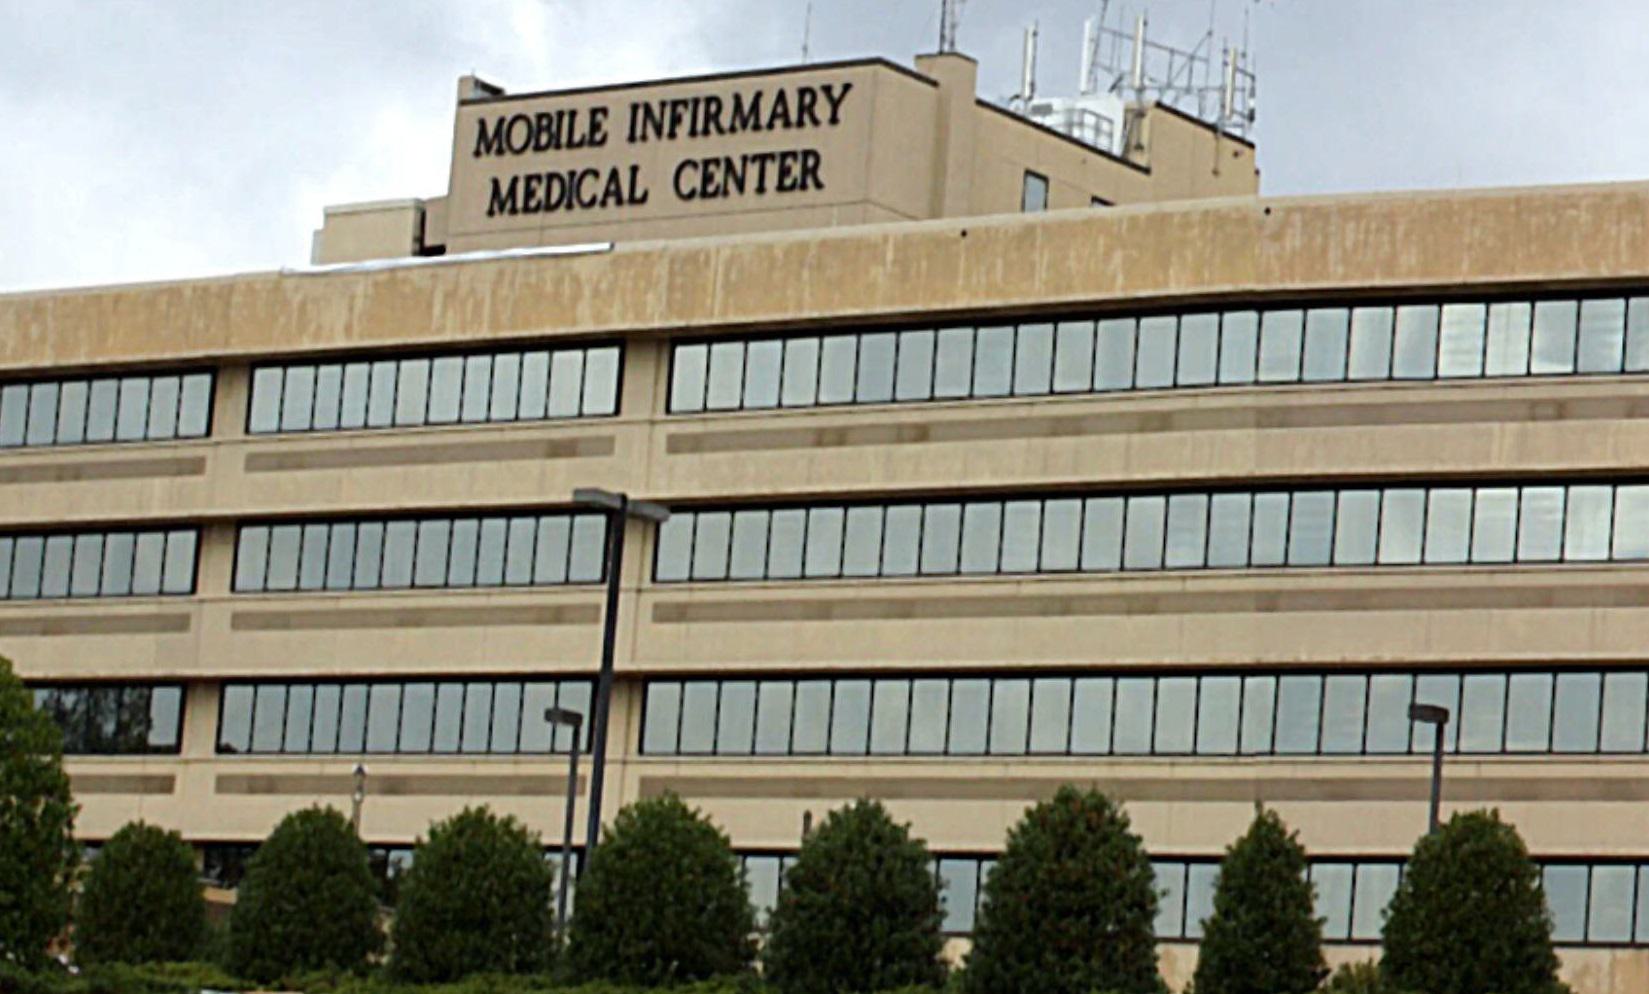 Mobile Infirmary front facade